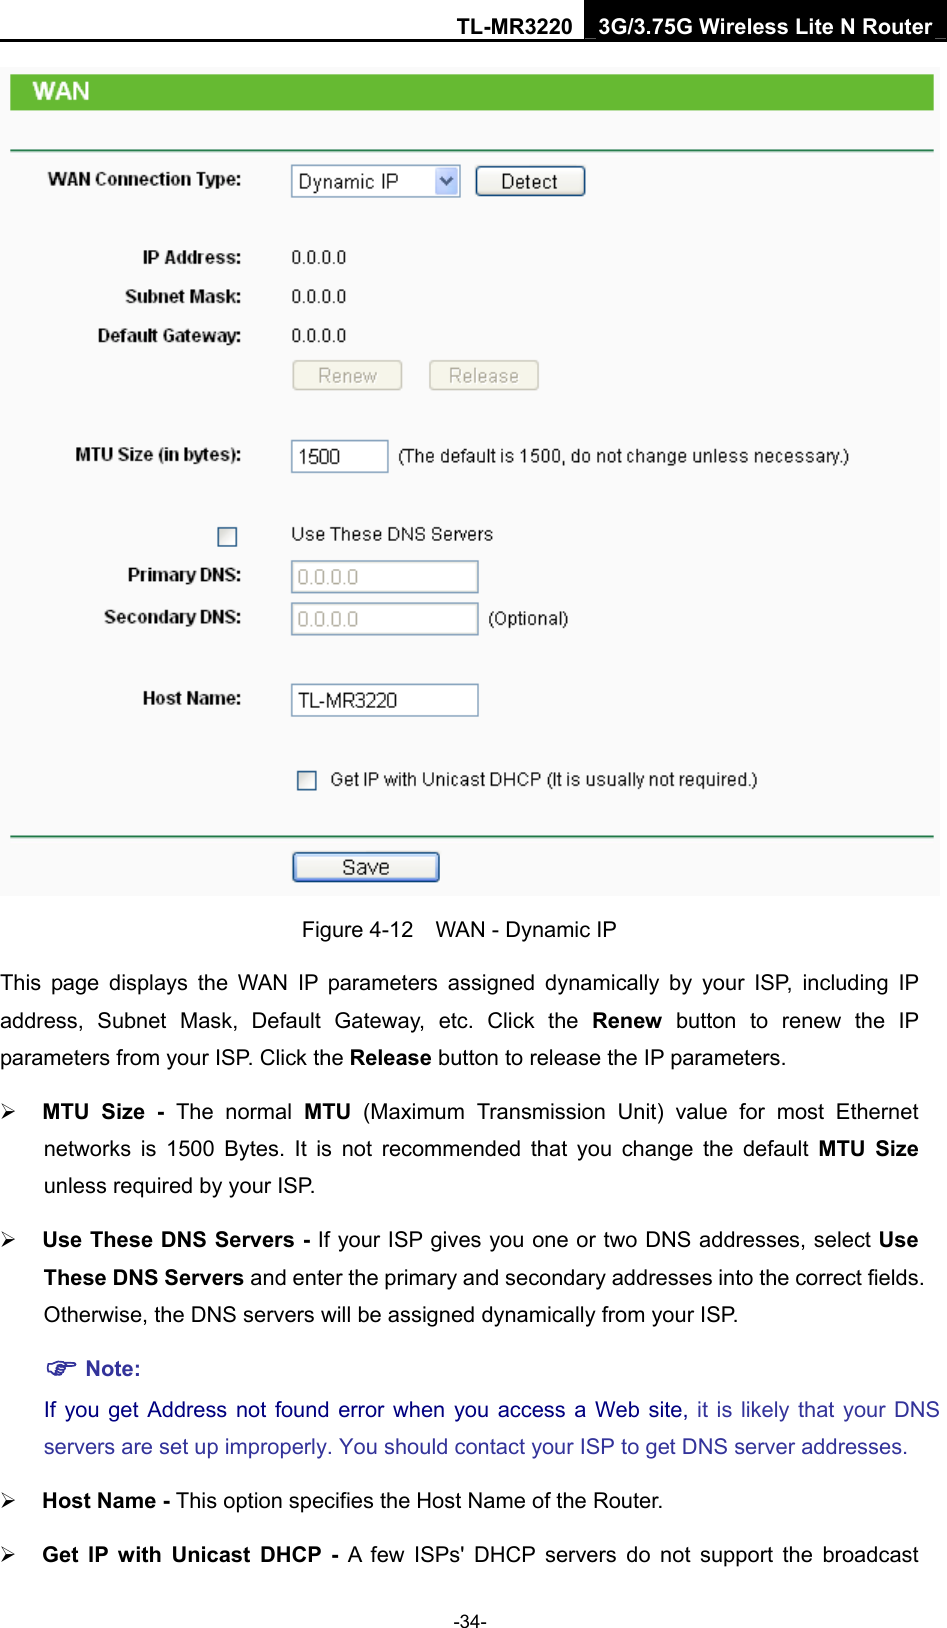 TL-MR3220 3G/3.75G Wireless Lite N Router -34-  Figure 4-12    WAN - Dynamic IP This page displays the WAN IP parameters assigned dynamically by your ISP, including IP address, Subnet Mask, Default Gateway, etc. Click the Renew button to renew the IP parameters from your ISP. Click the Release button to release the IP parameters. ¾ MTU Size - The normal MTU (Maximum Transmission Unit) value for most Ethernet networks is 1500 Bytes. It is not recommended that you change the default MTU Size unless required by your ISP.   ¾ Use These DNS Servers - If your ISP gives you one or two DNS addresses, select Use These DNS Servers and enter the primary and secondary addresses into the correct fields. Otherwise, the DNS servers will be assigned dynamically from your ISP.   ) Note: If you get Address not found error when you access a Web site, it is likely that your DNS servers are set up improperly. You should contact your ISP to get DNS server addresses.   ¾ Host Name - This option specifies the Host Name of the Router. ¾ Get IP with Unicast DHCP - A few ISPs&apos; DHCP servers do not support the broadcast 